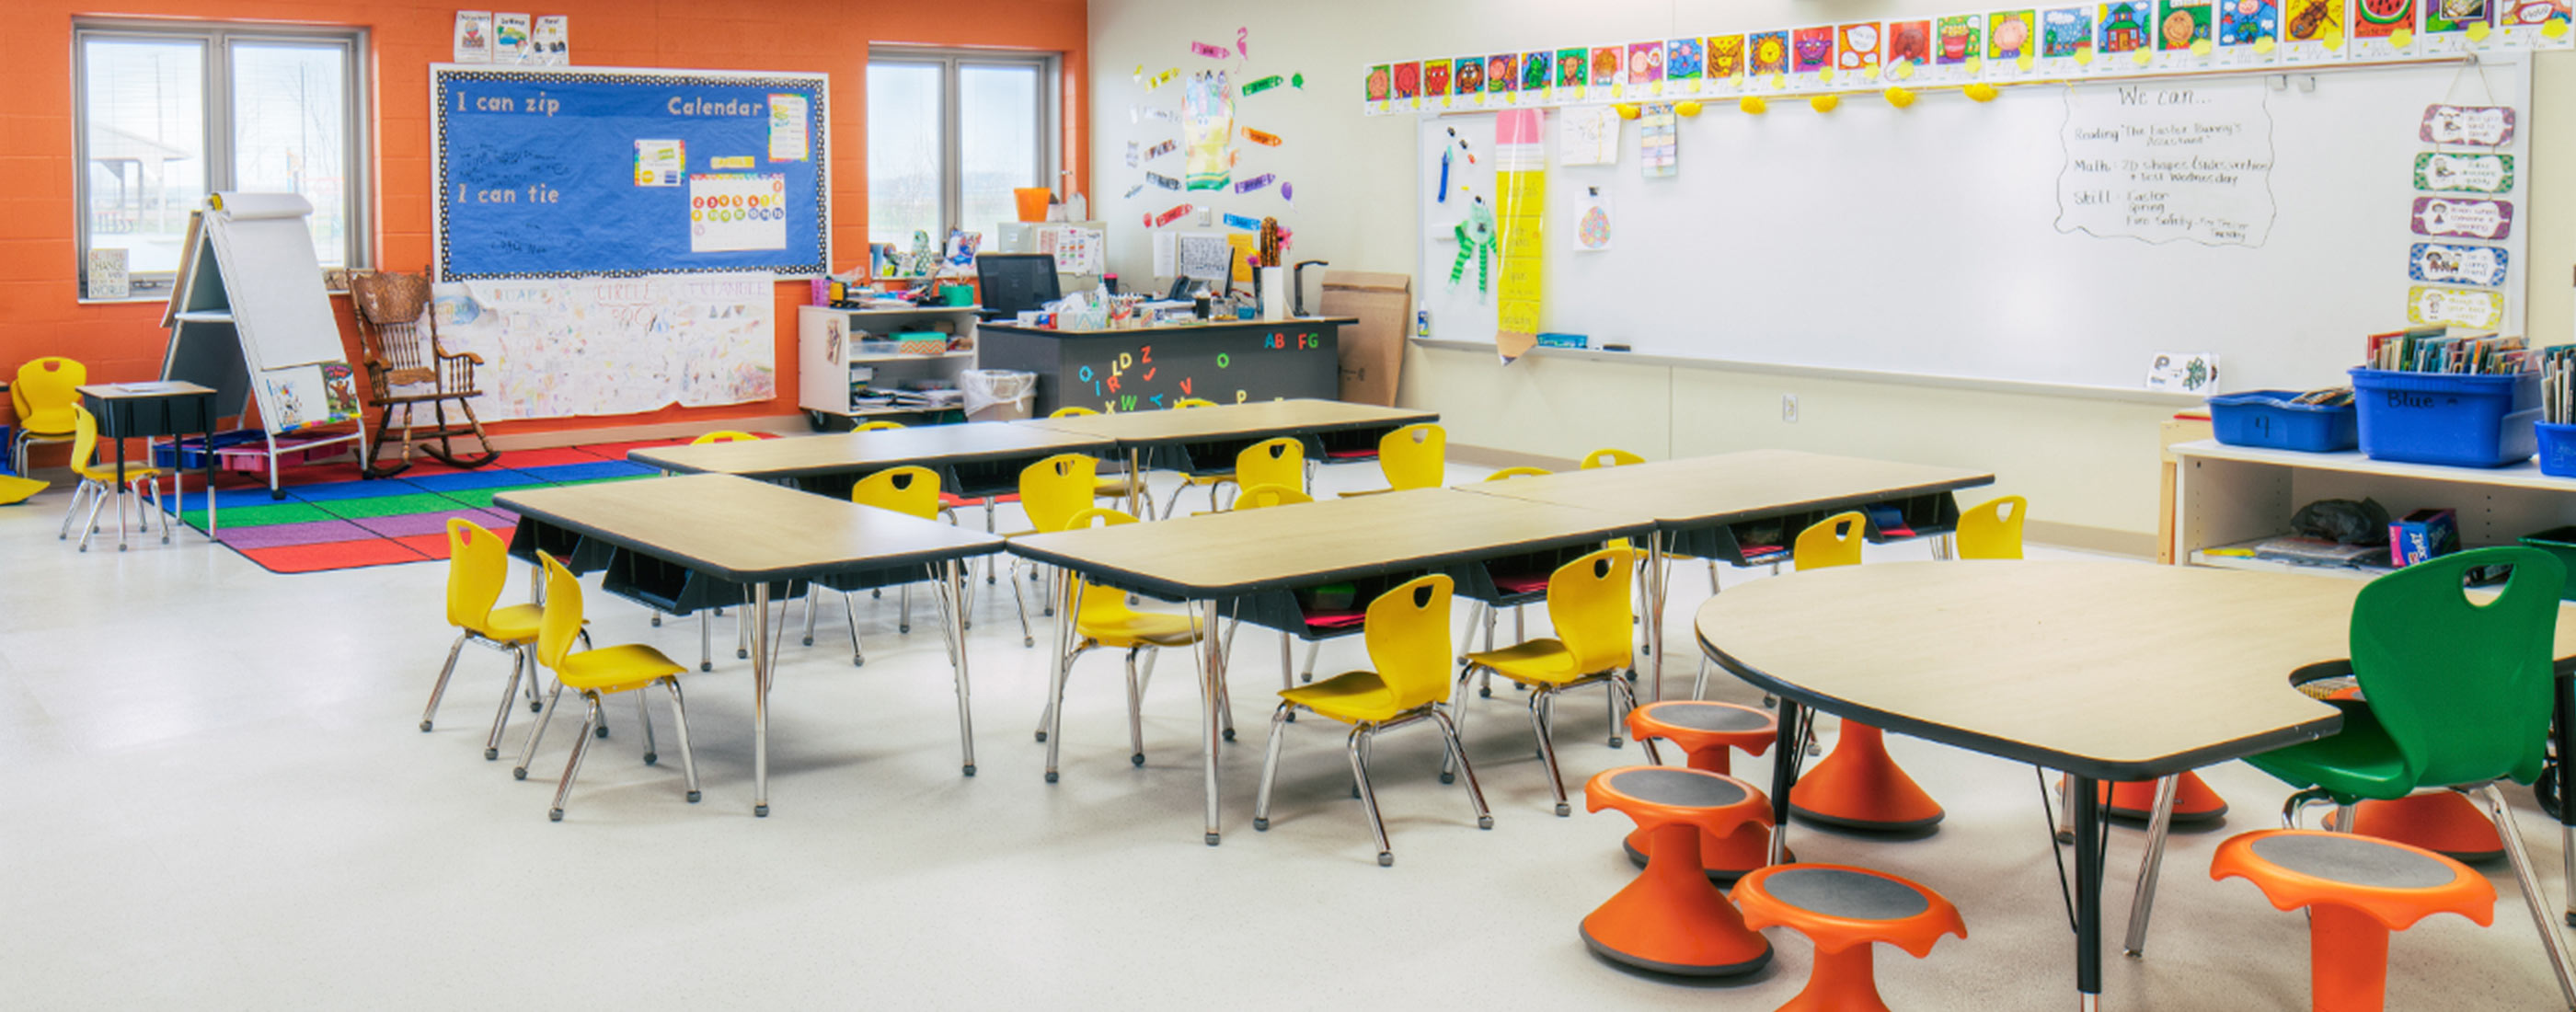 Reconfigurable furniture and bright colors create a flexible classroom in West Liberty-Salem Local School District’s campus, designed by OHM Advisors.